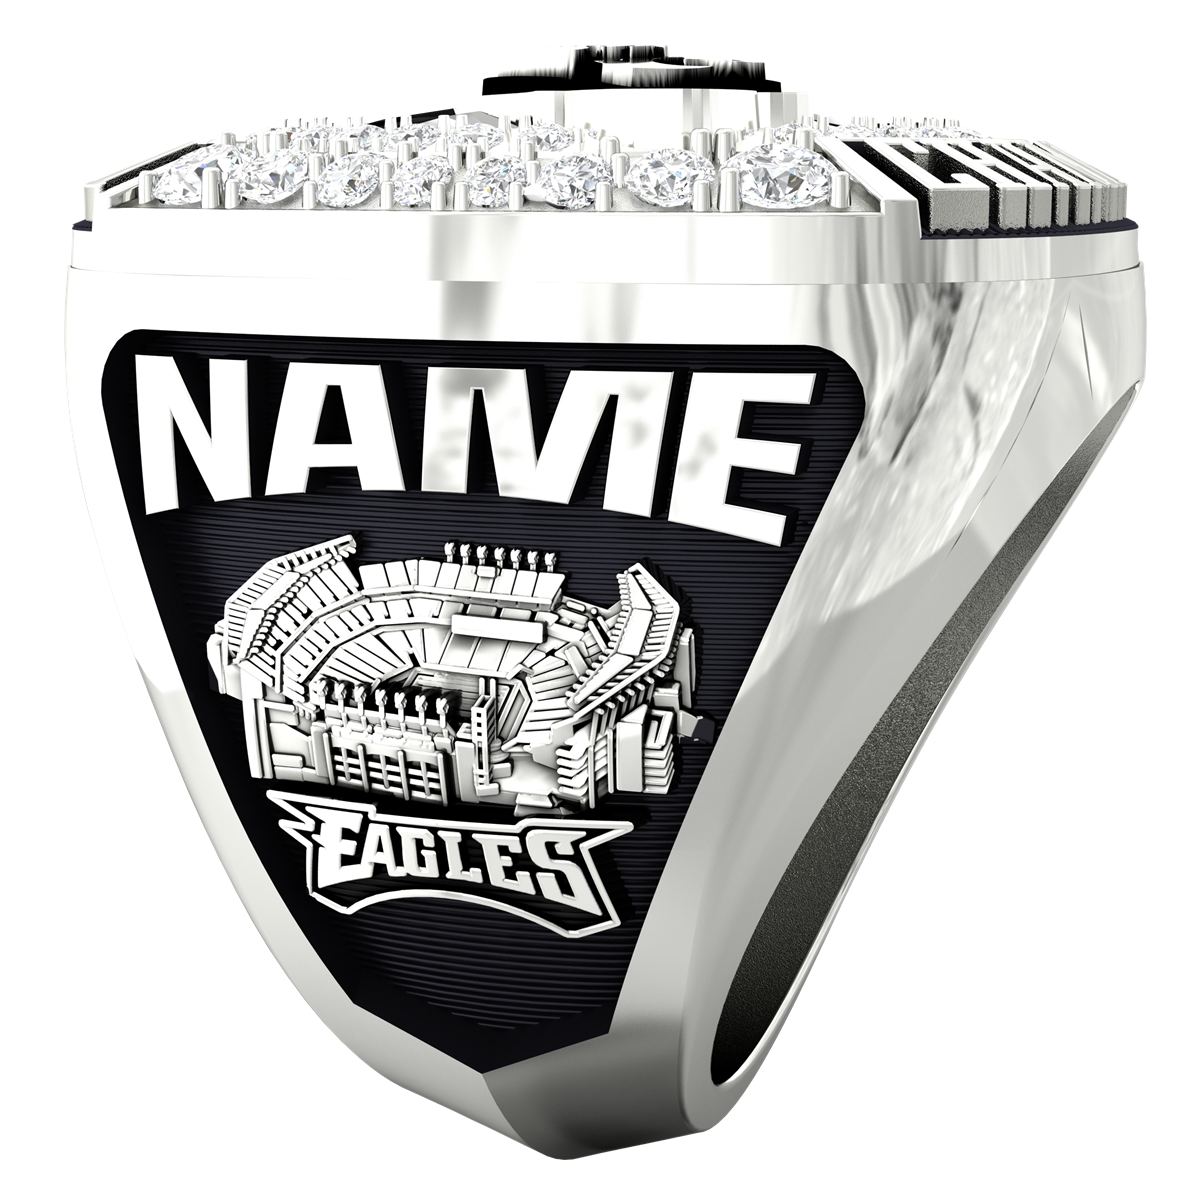 How to purchase an Eagles Super Bowl championship ring